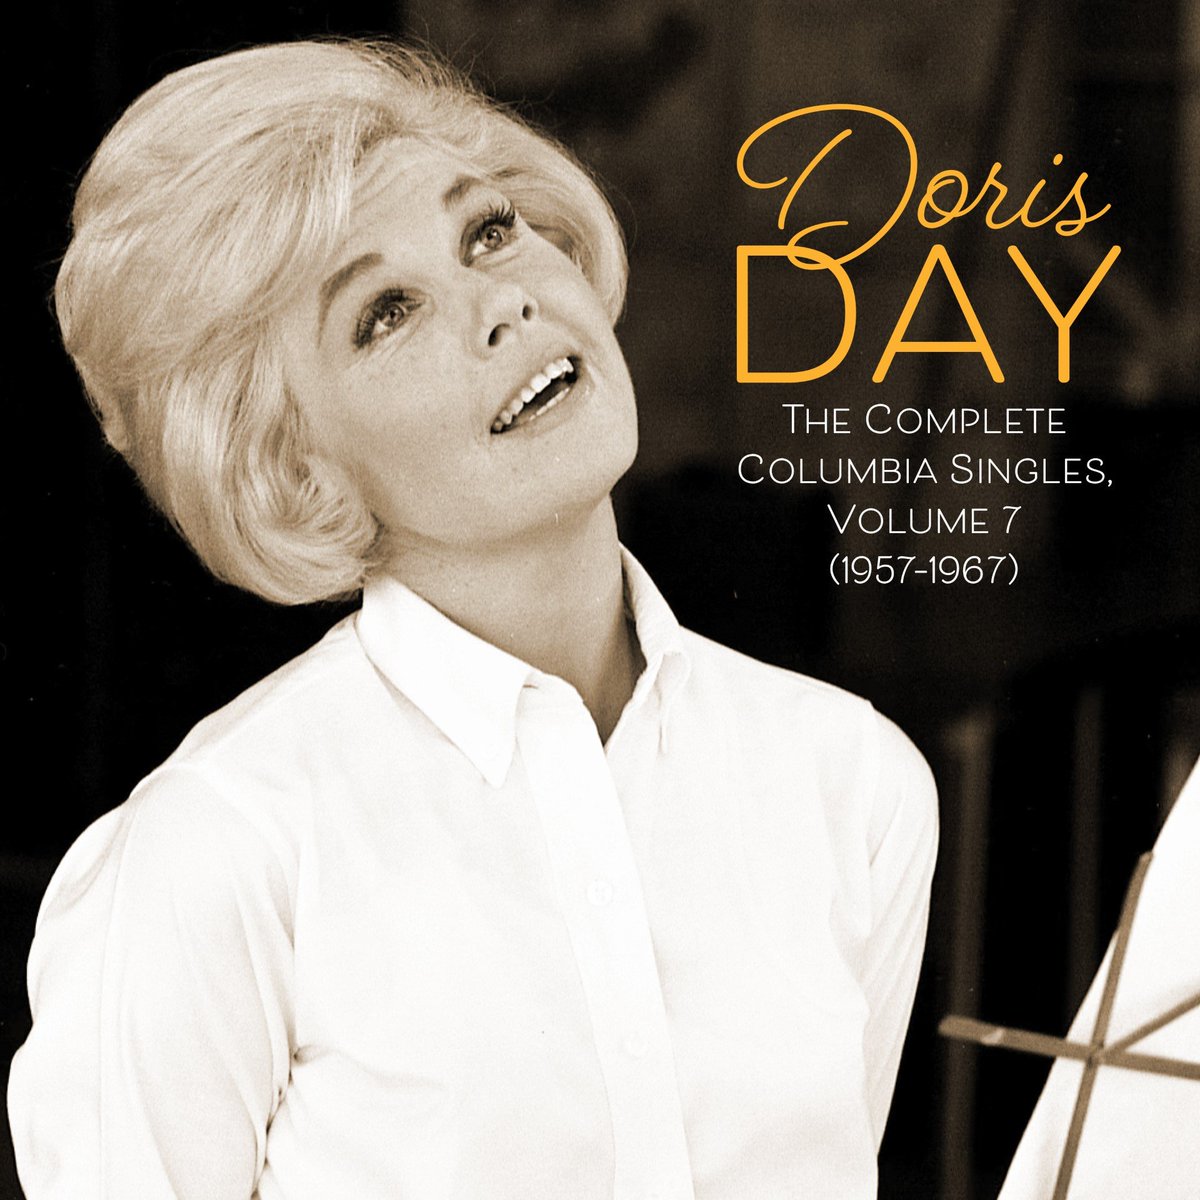 Here’s a birthday peek preview of the final digital album release from Sony Music featuring Doris’ original Columbia Records singles.  This collection will be released to all major streaming platforms in a few weeks, so please keep your eyes and ears open!